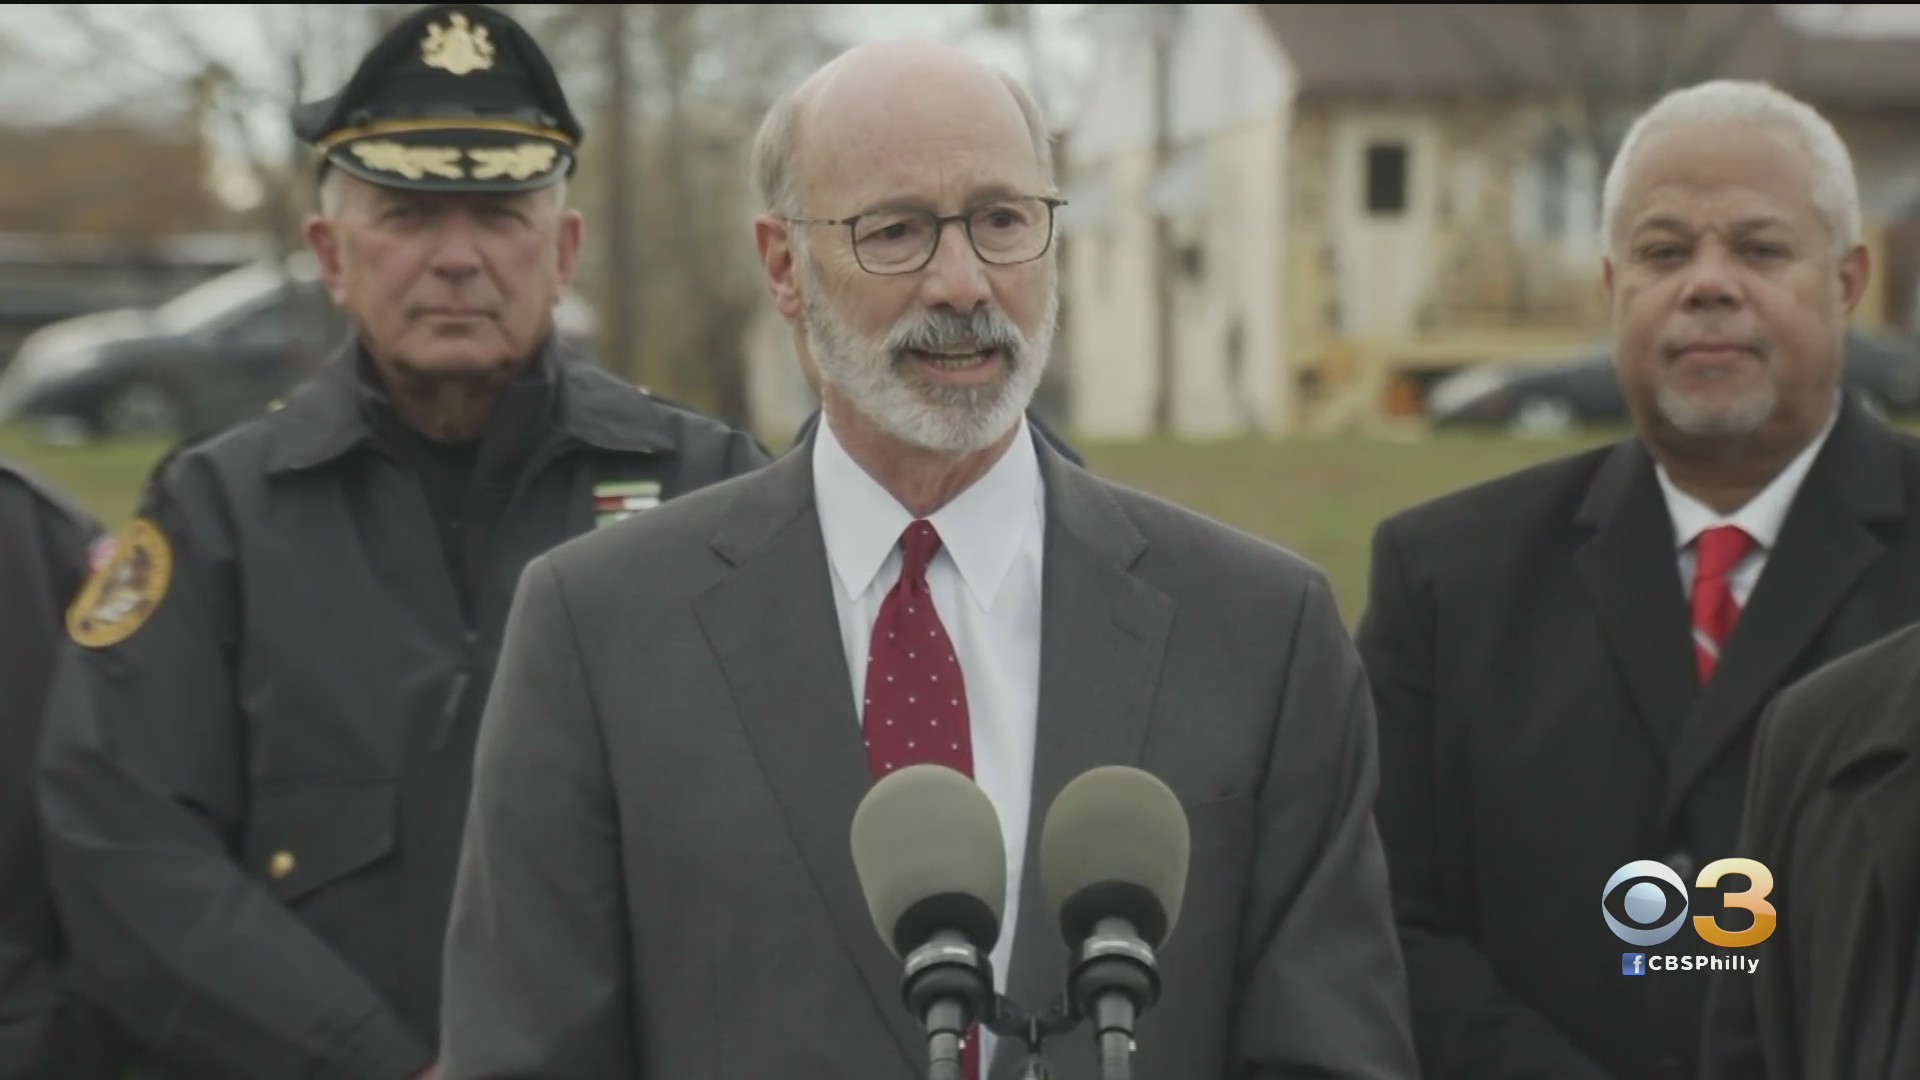 Gov. Tom Wolf Visits Chester, Praises Organizations Working To Make Streets Safer From Gun Violence